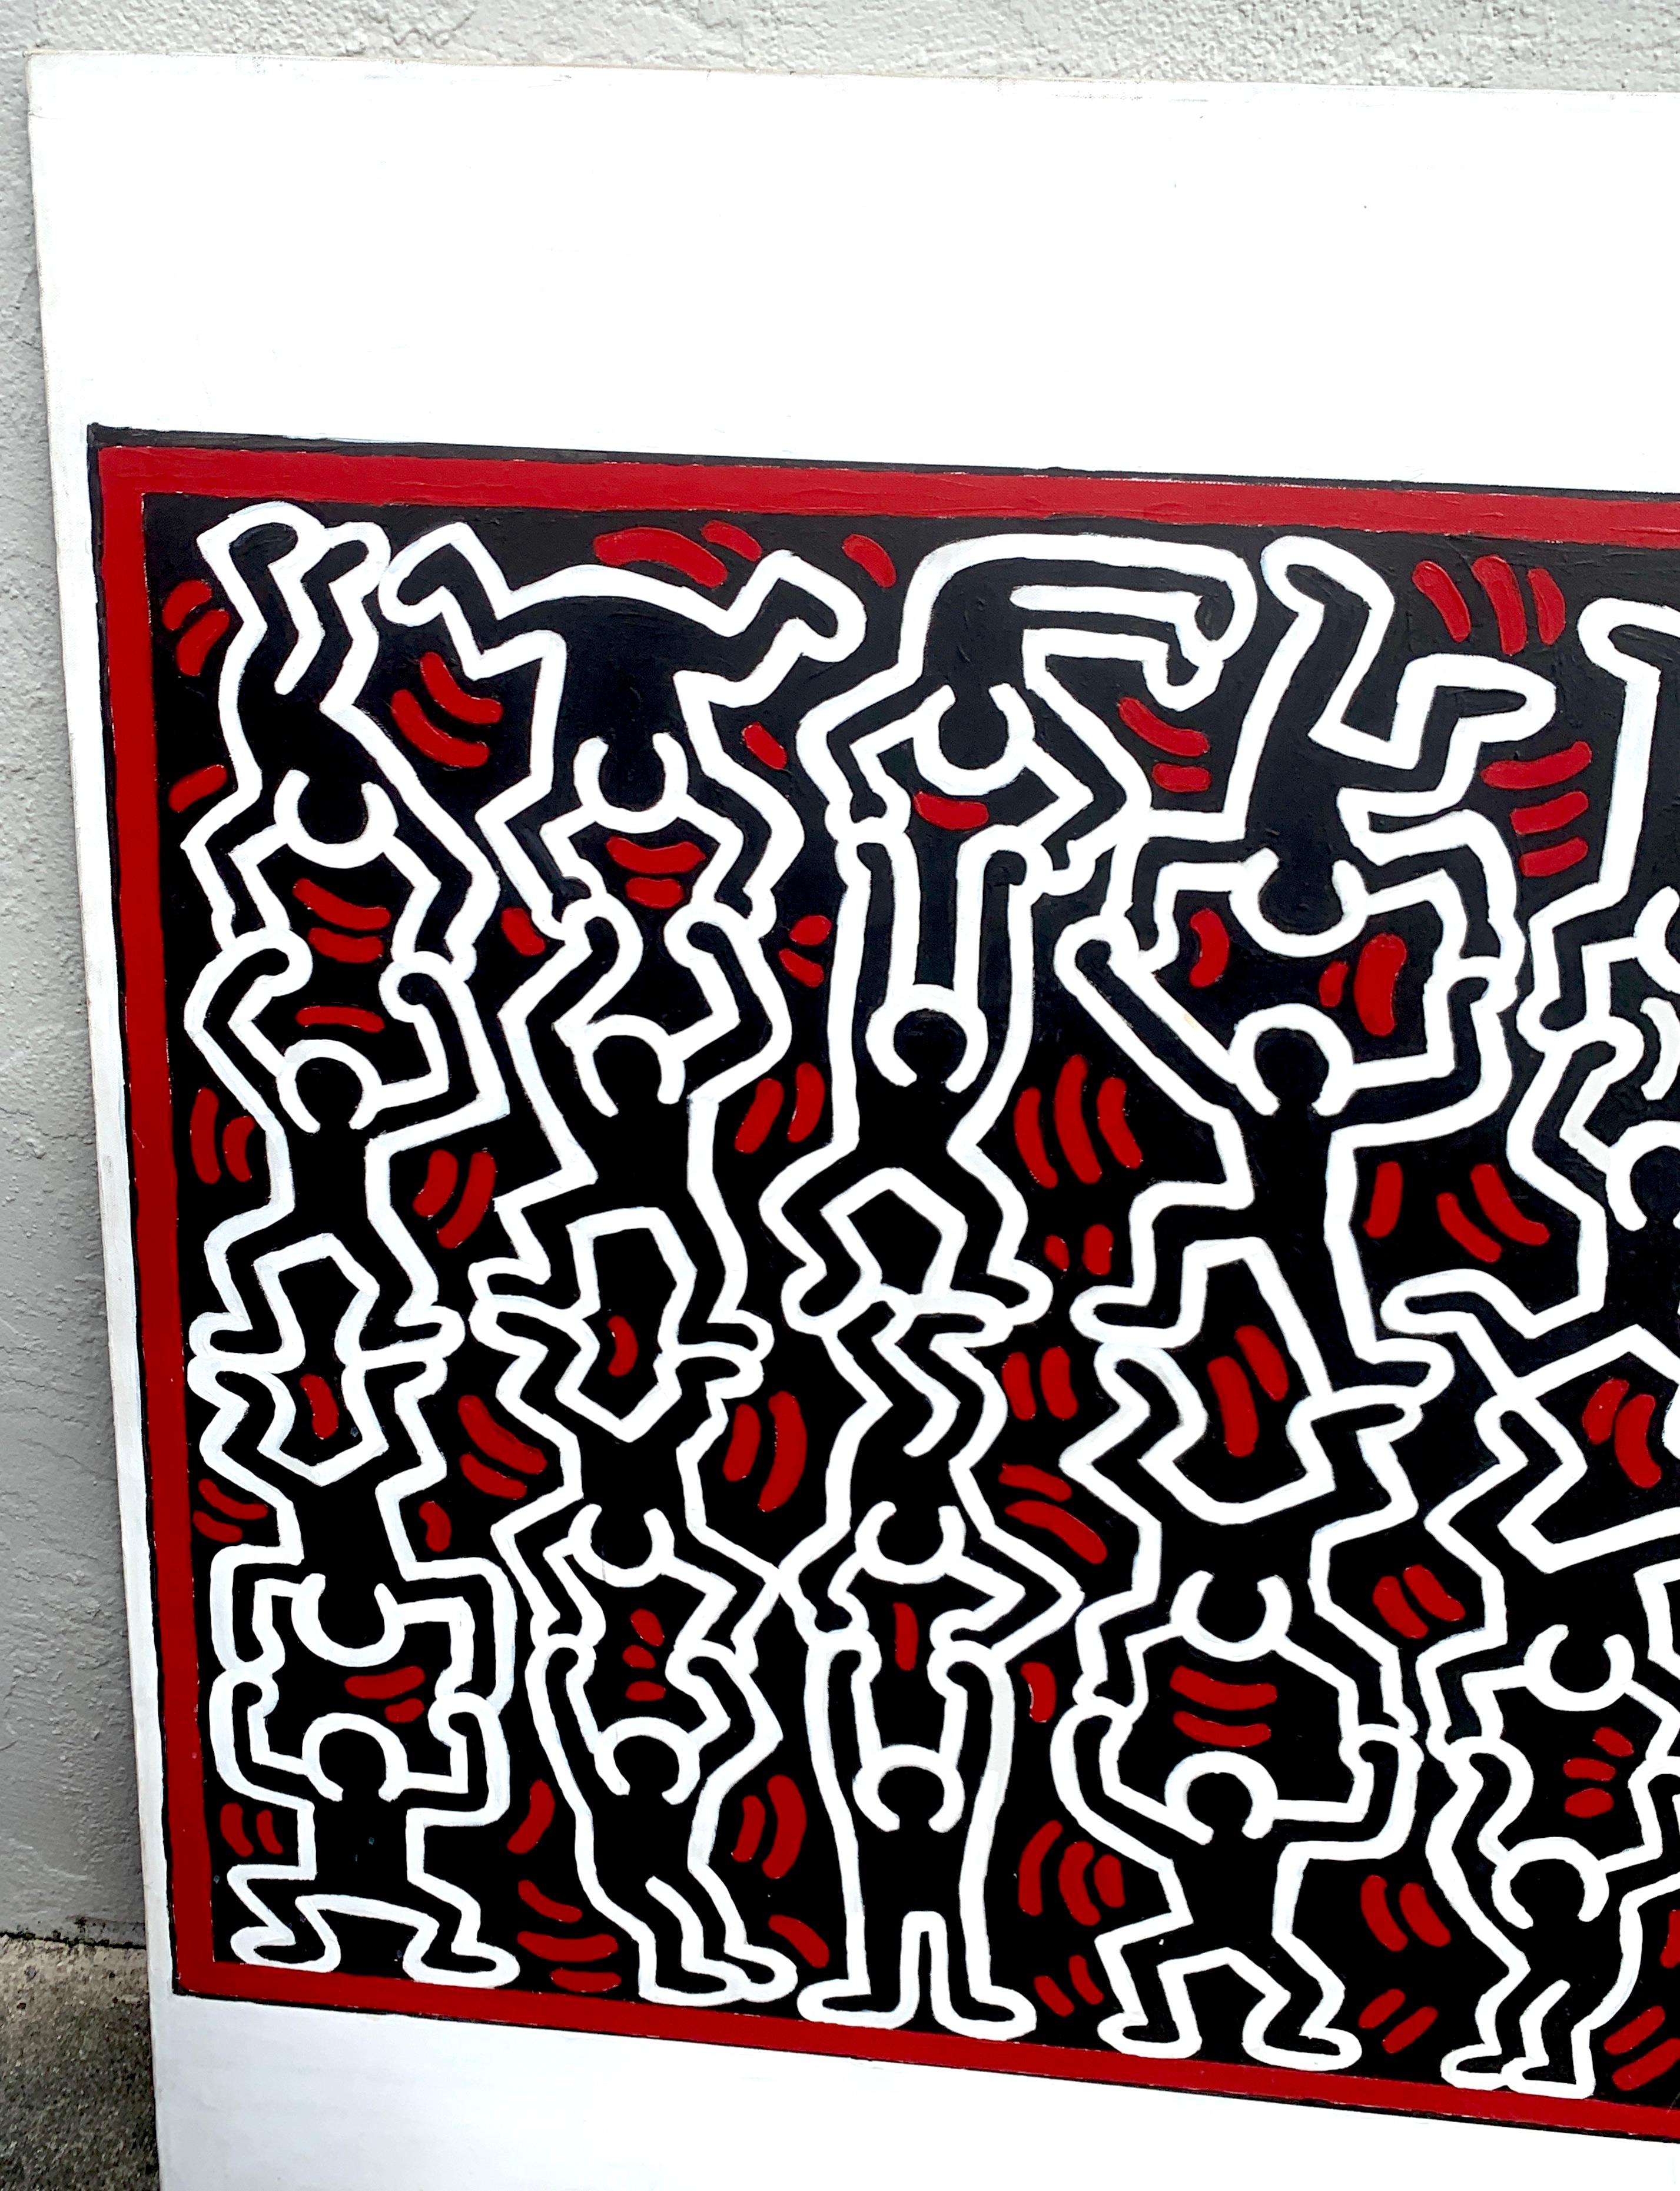 acrobats by keith haring